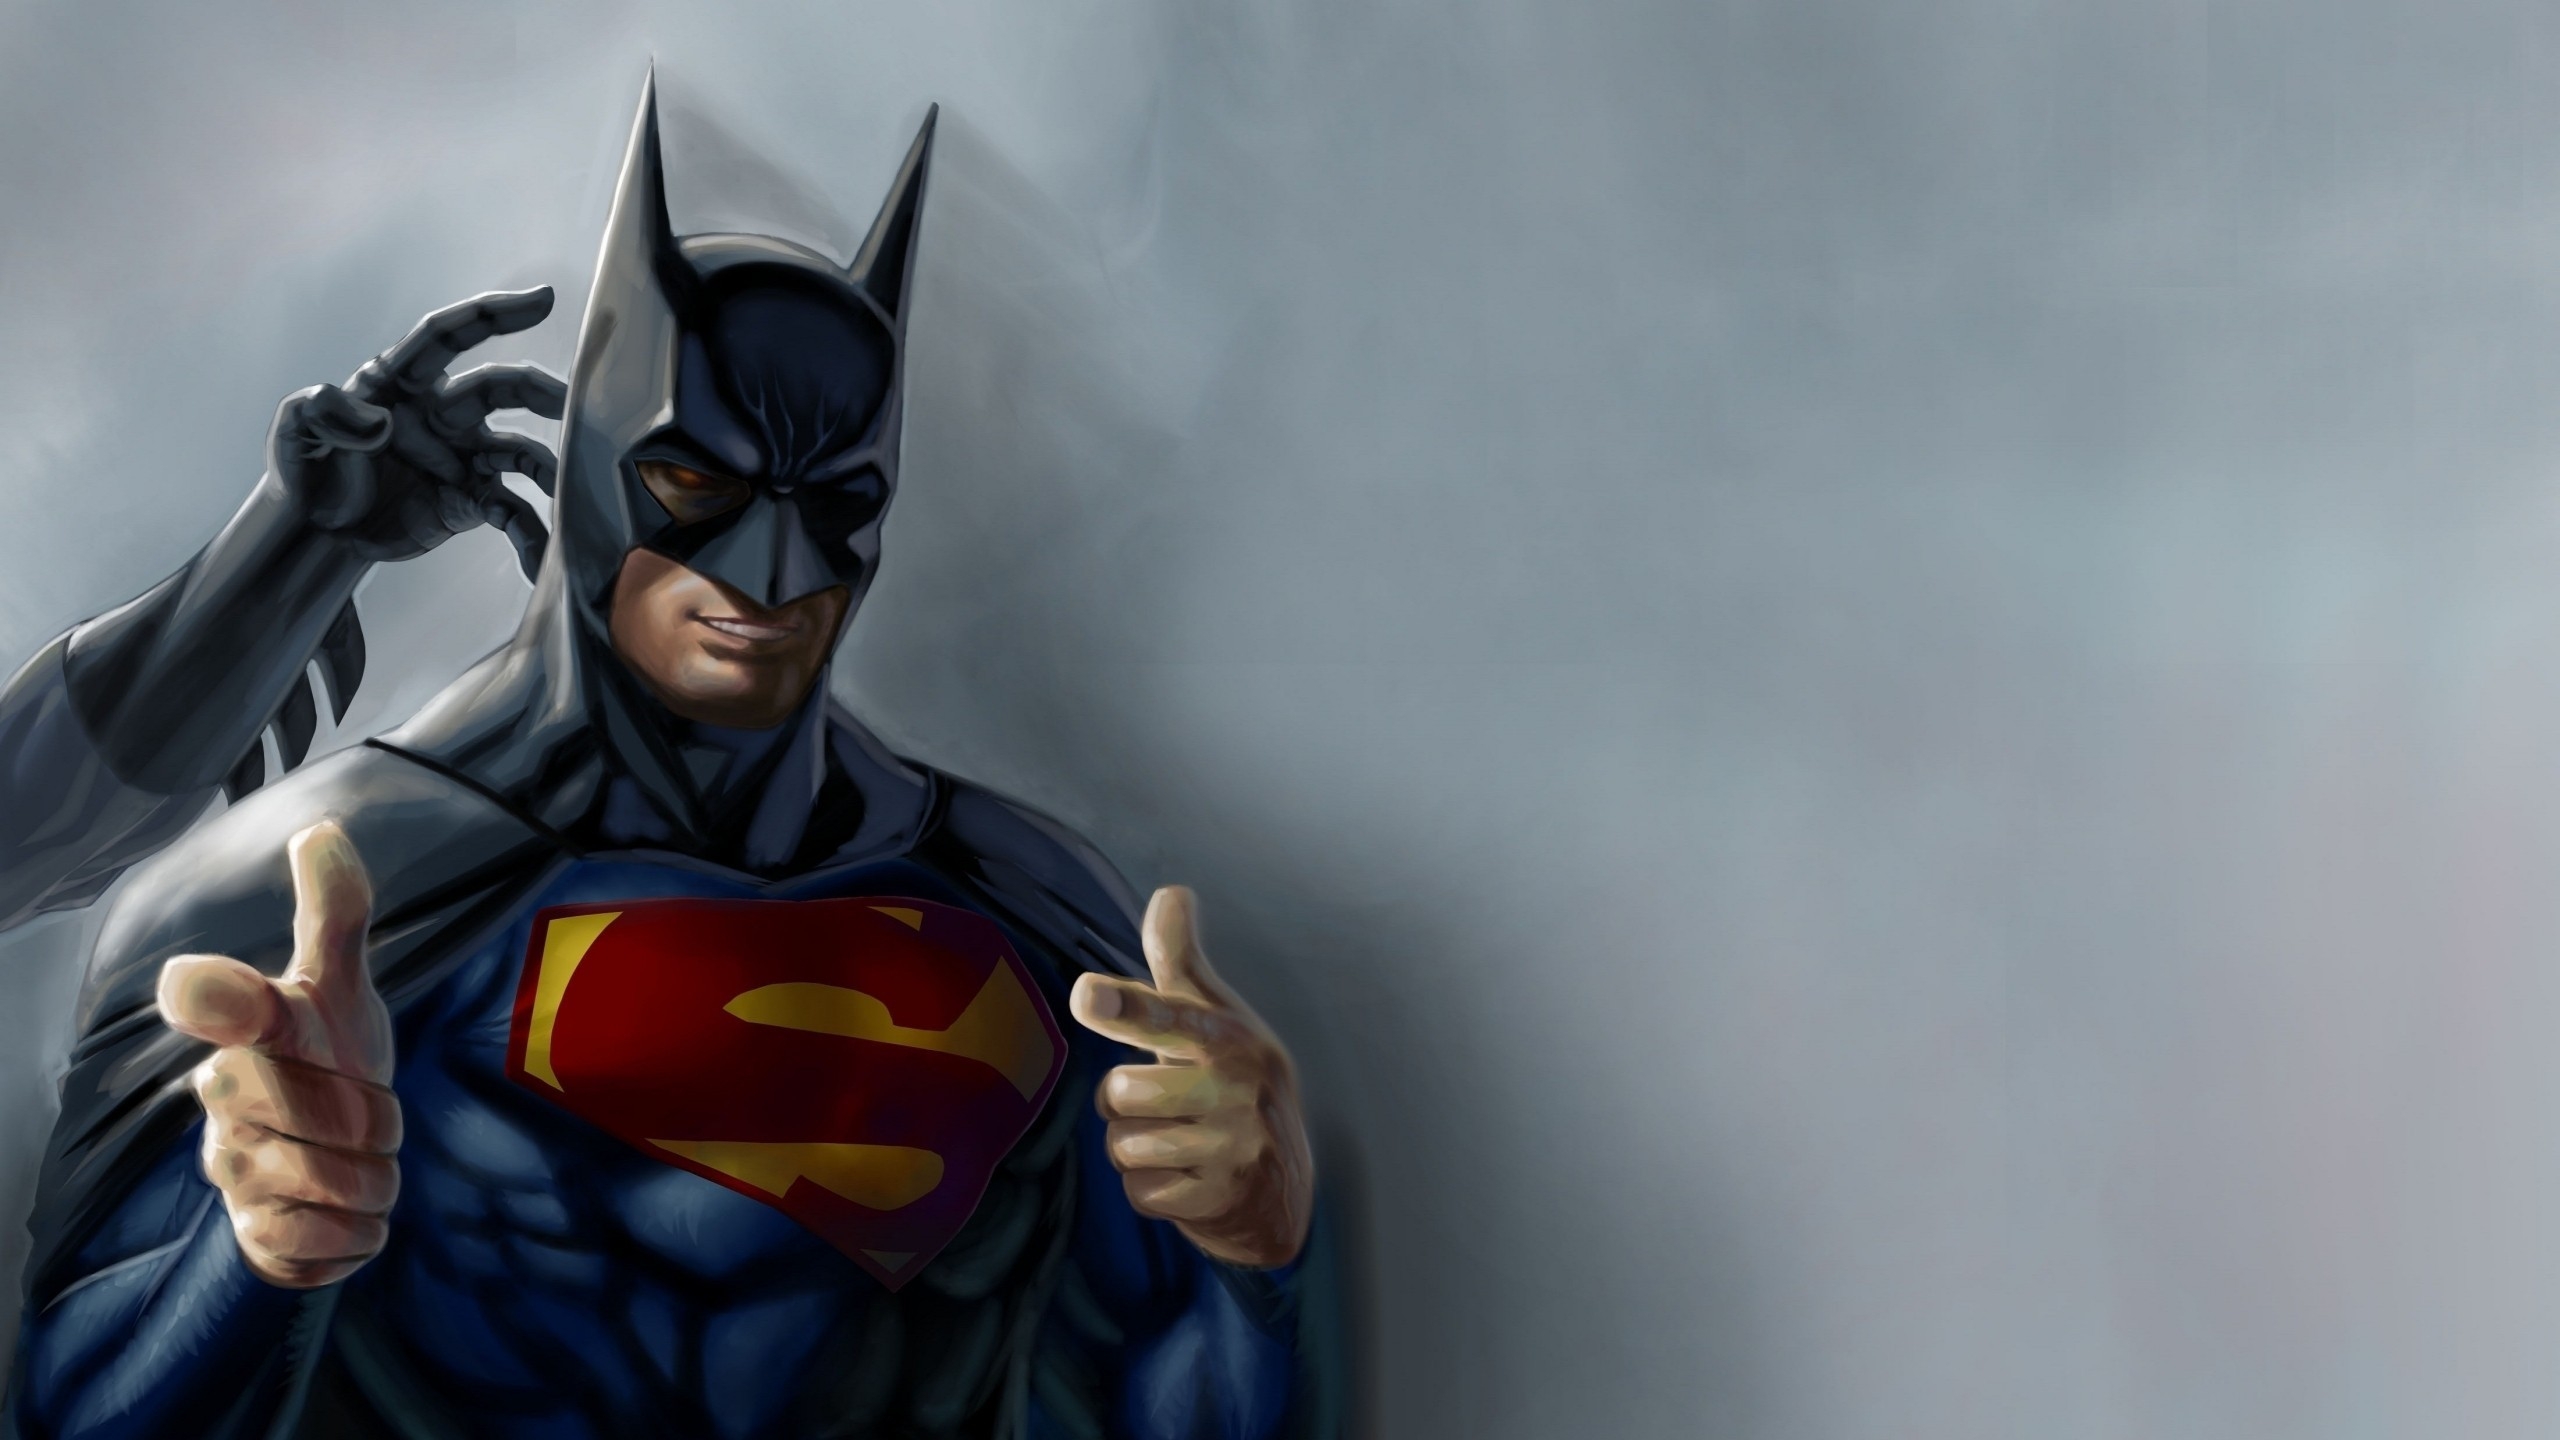 Batman and Superman for 2560x1440 HDTV resolution